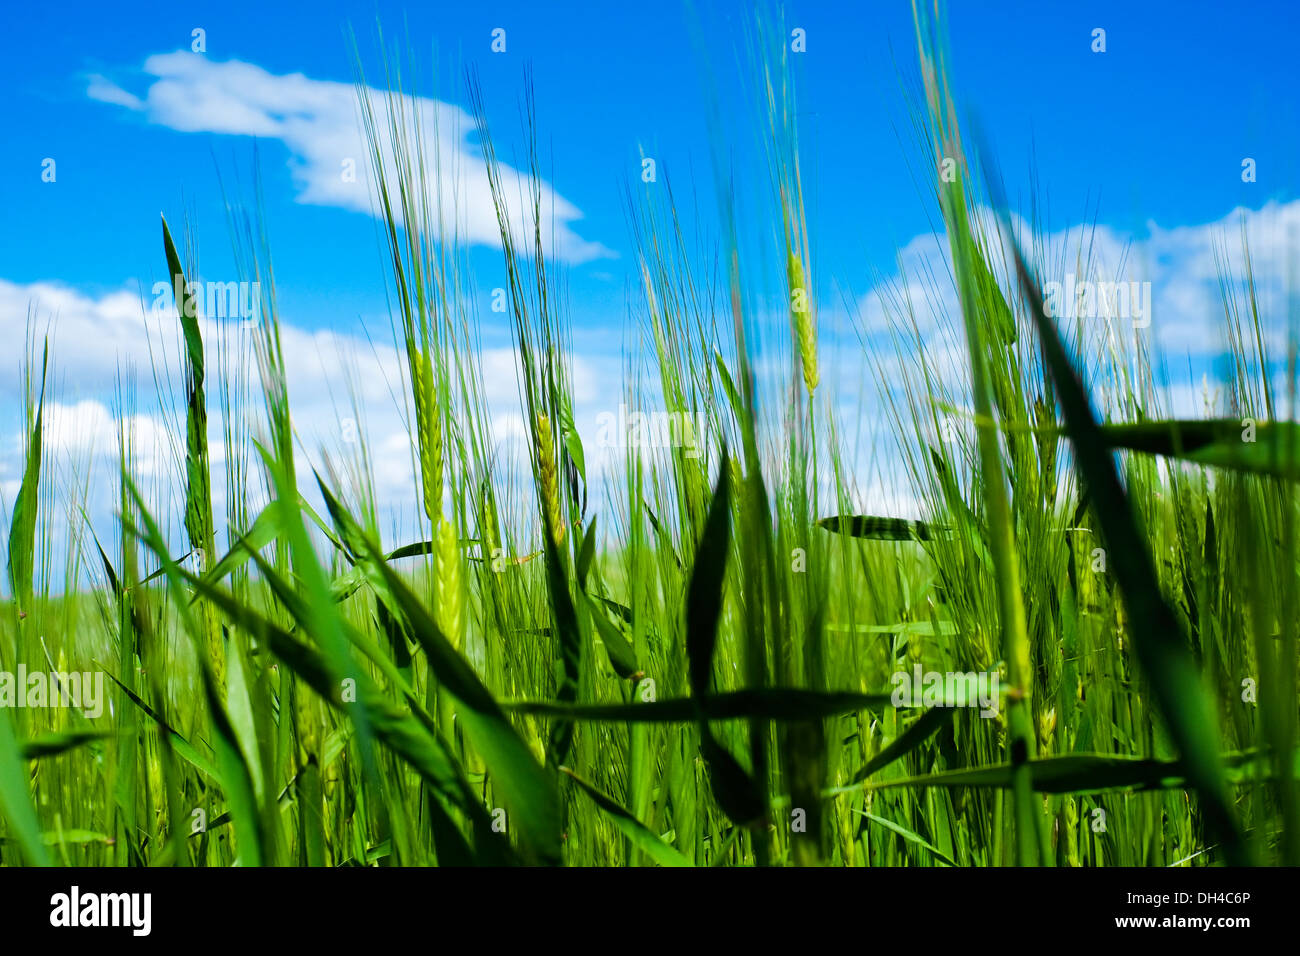 Wheat field in spring with blue sky Stock Photo